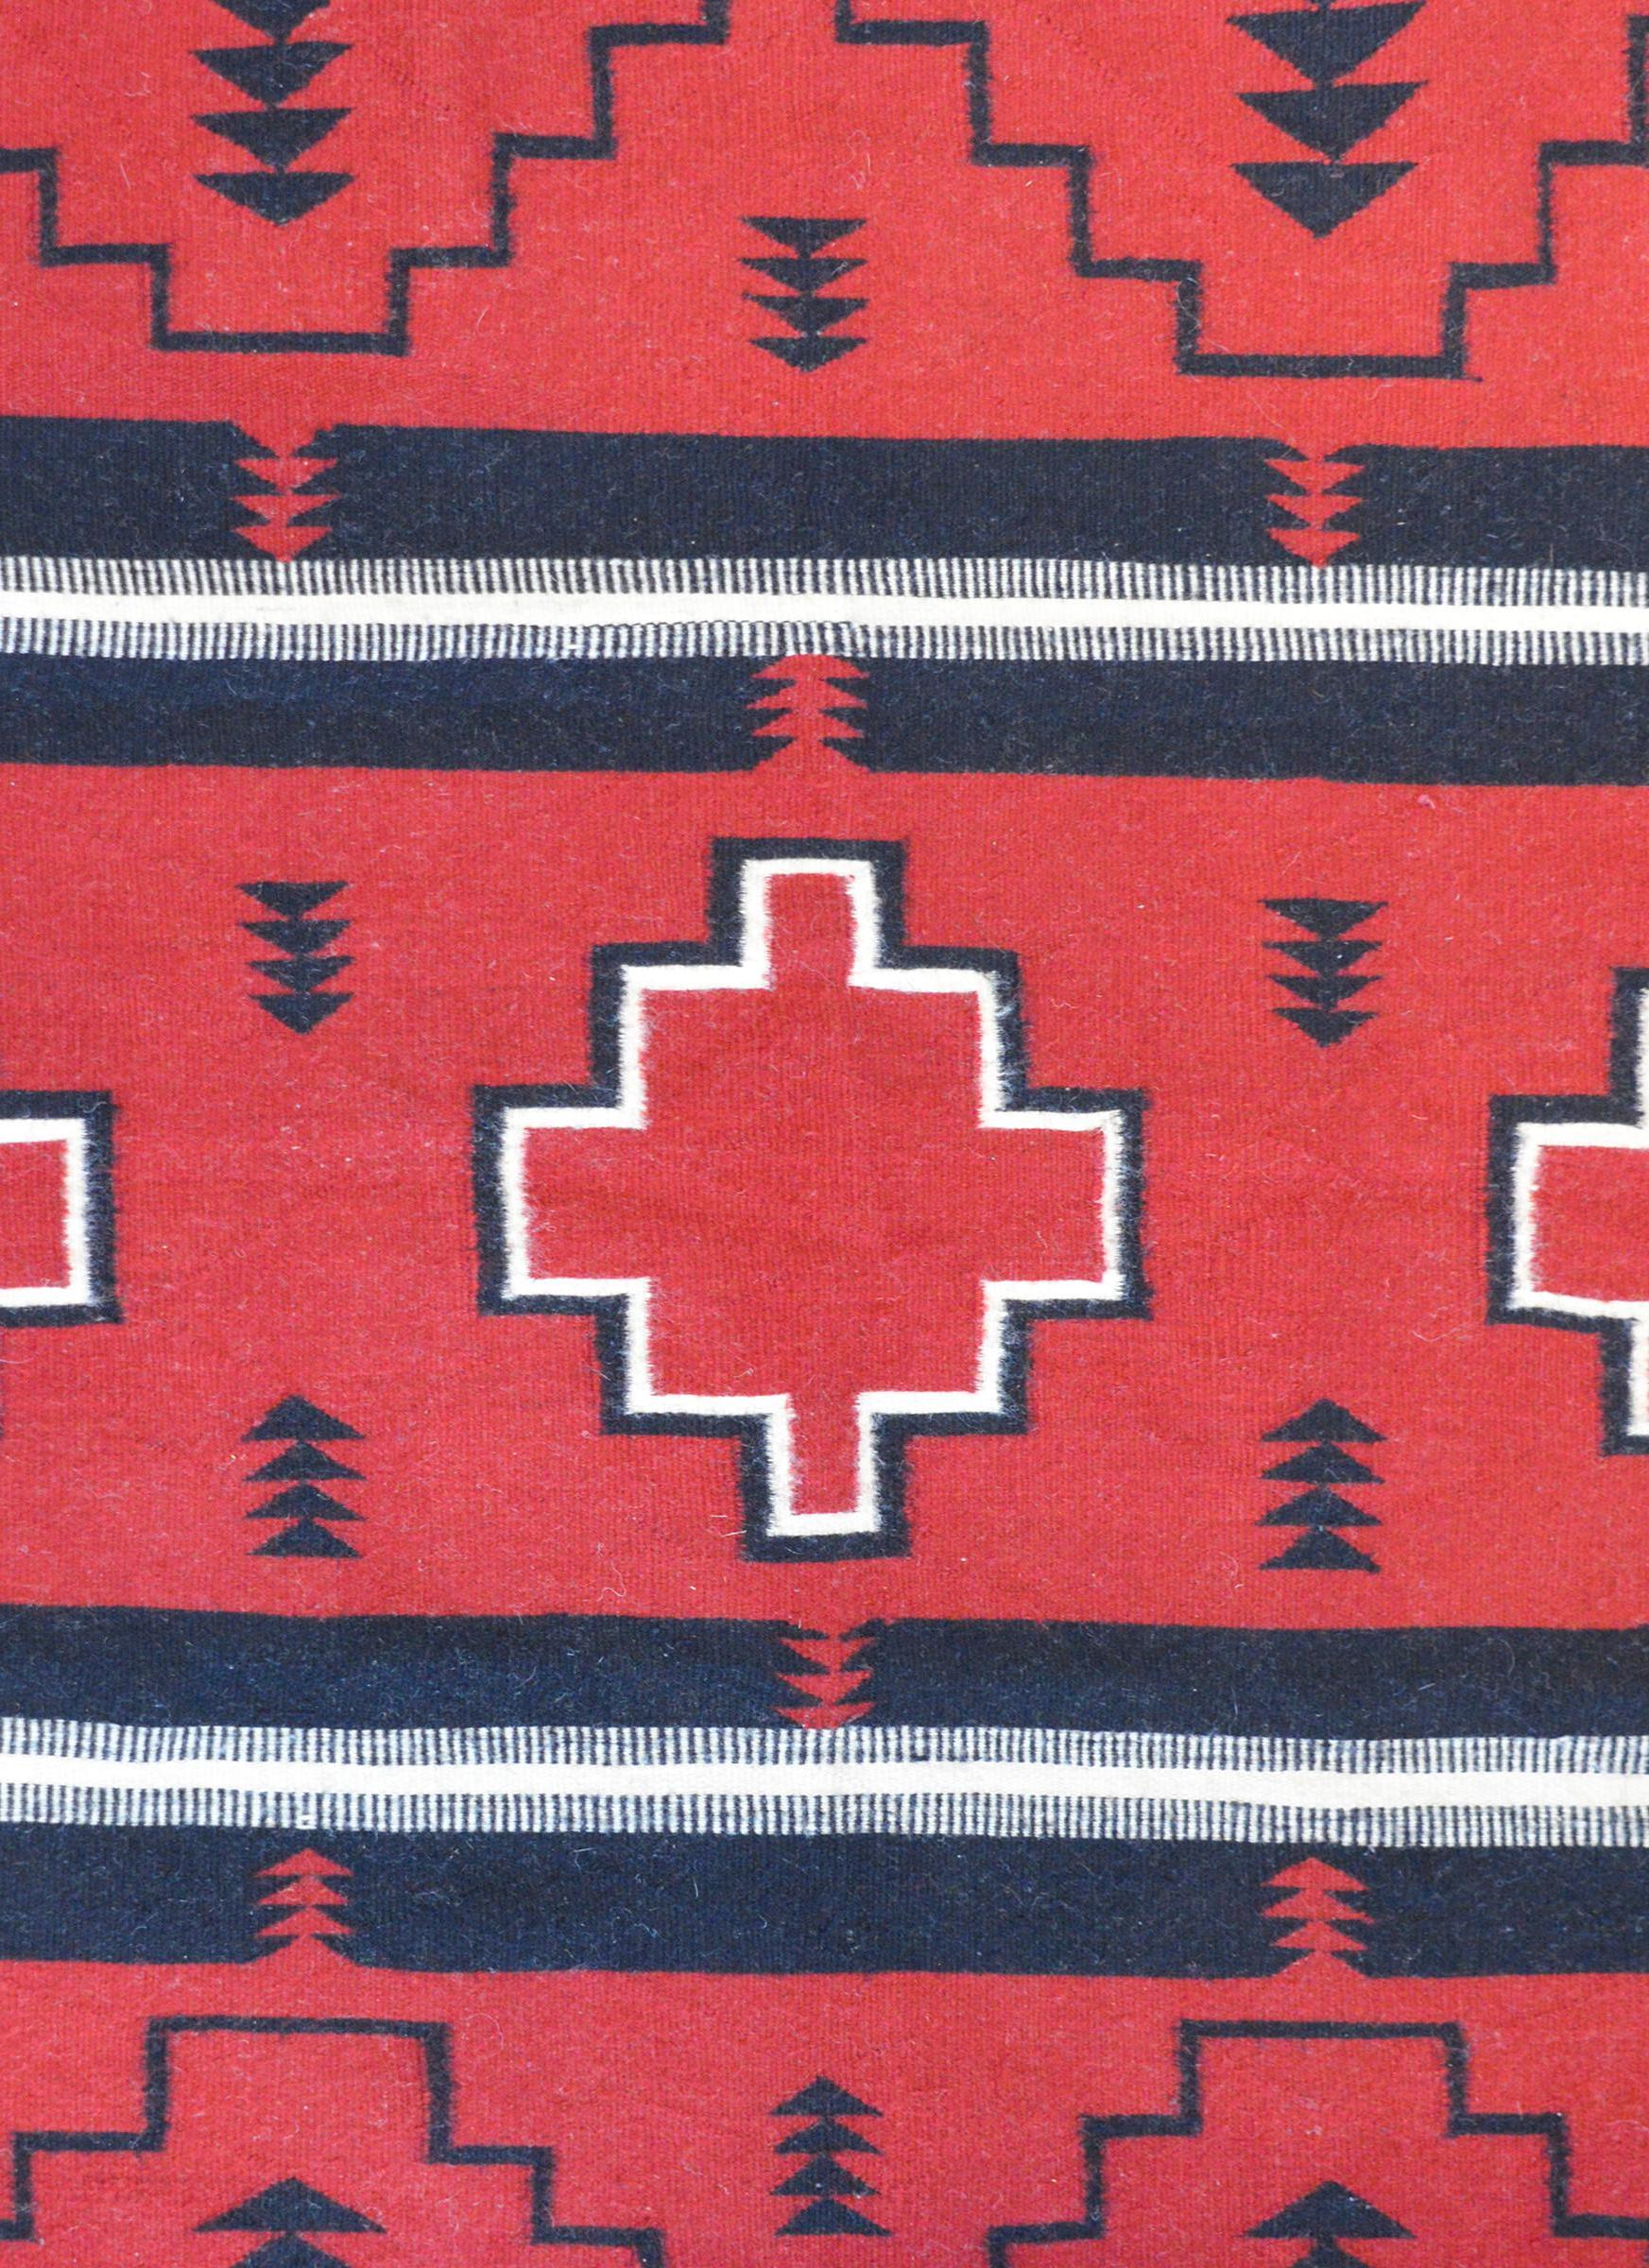 A beautiful mid-20th century Navajo rug with a bold crimson, black, and white pattern with a large diamond in the center amidst a field of small black arrows.